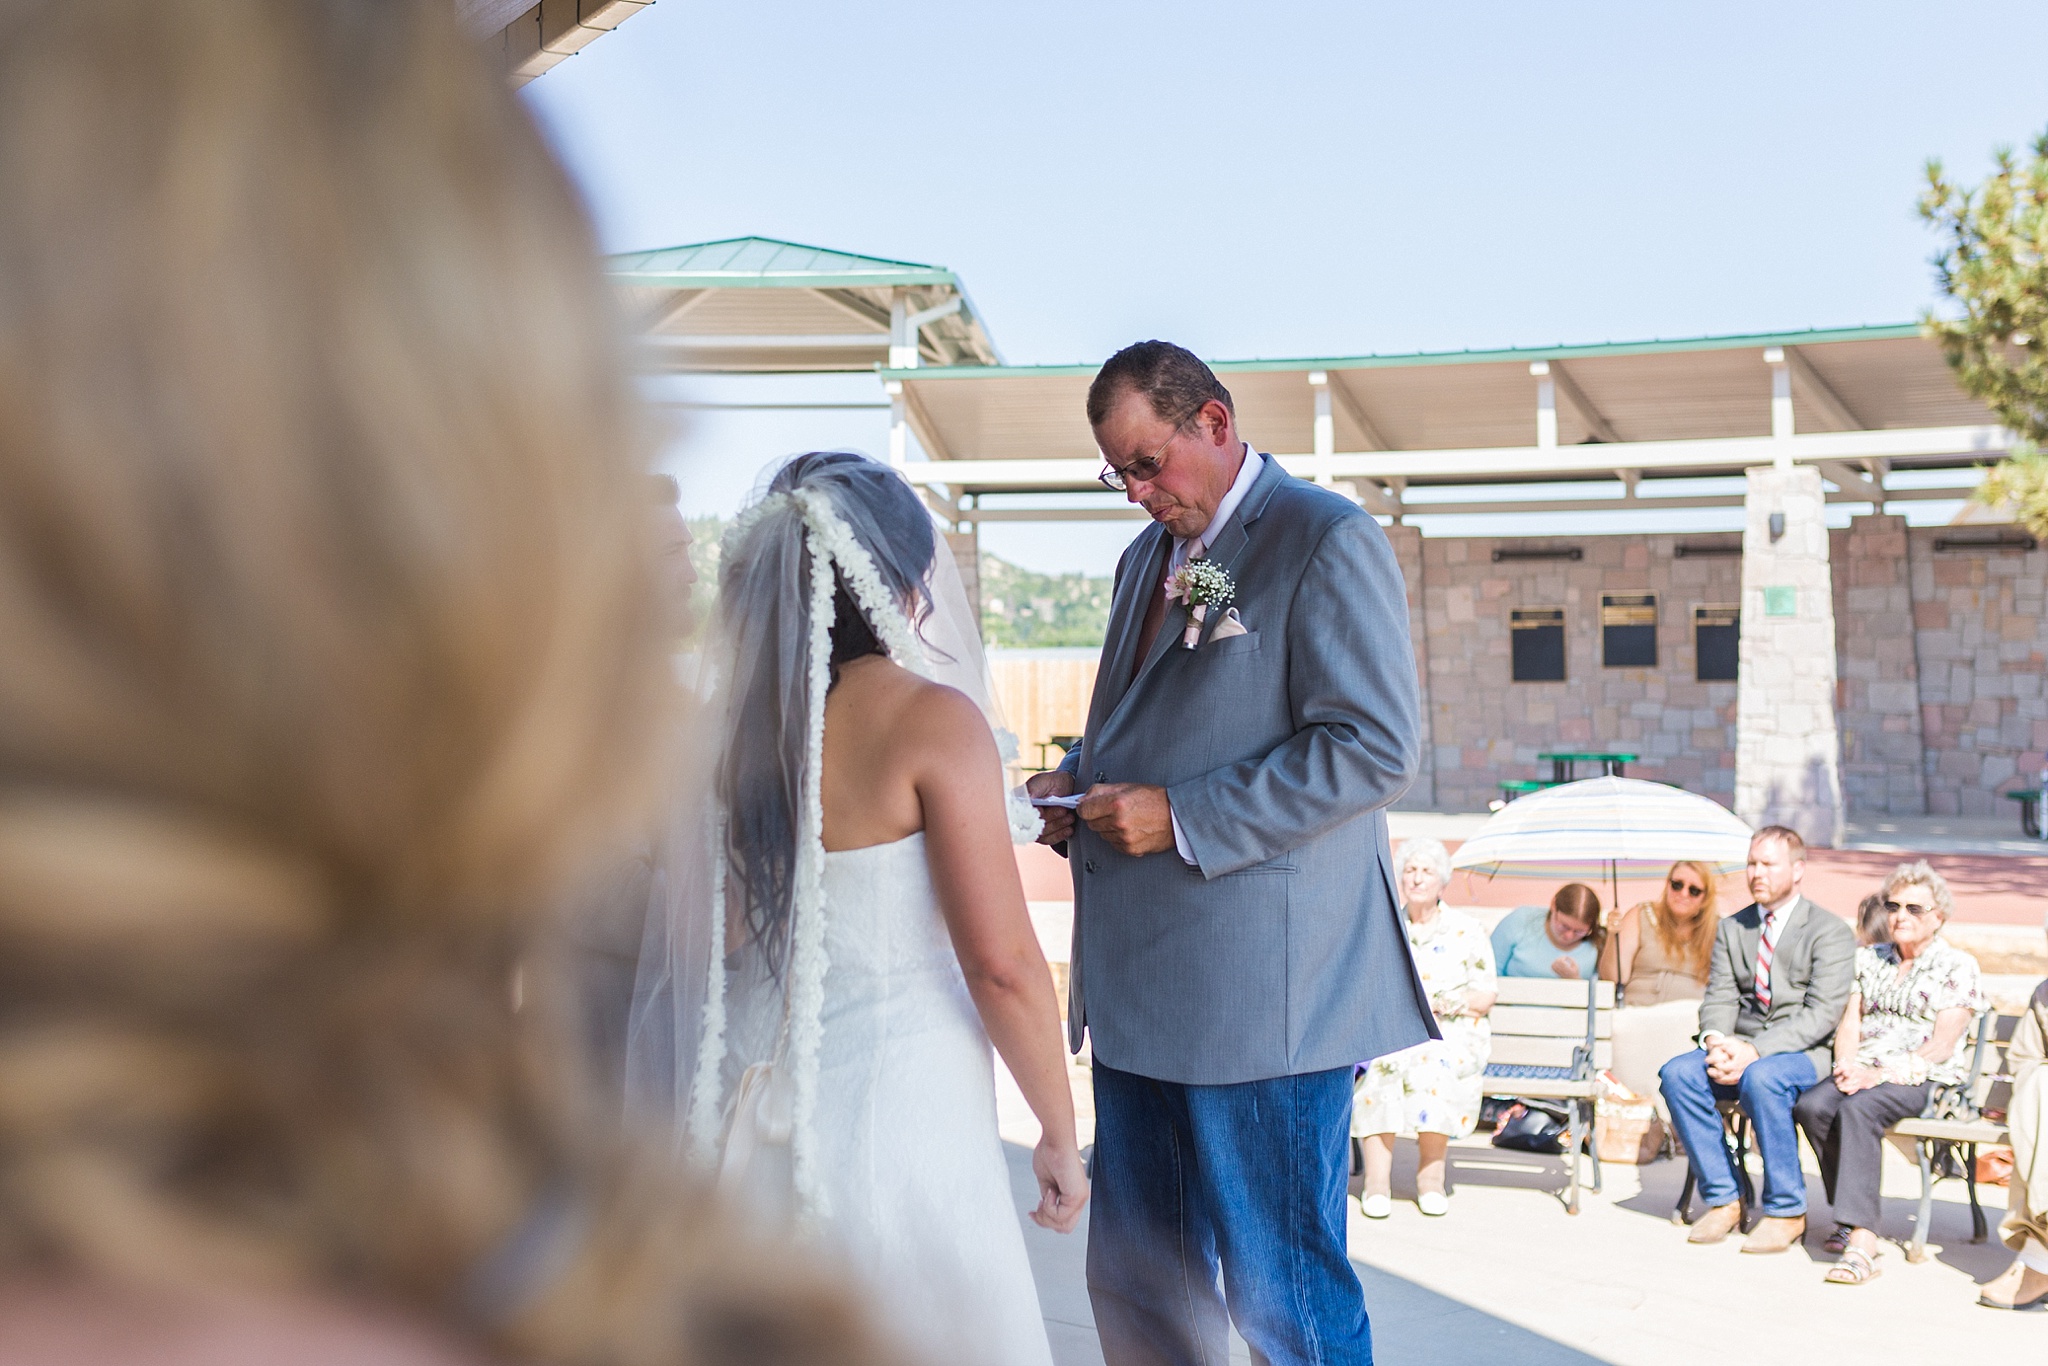 Bride’s father giving a speech during the ceremony. Katie & Jake’s Castle Rock Wedding at the Douglas County Fairgrounds by Colorado Wedding Photographer, Jennifer Garza. Colorado Wedding Photographer, Colorado Wedding Photography, Douglas County Fairgrounds Wedding Photography, Castle Rock Wedding Photography, Castle Rock Wedding Photographer, Colorado Wedding Photography, Colorado Wedding Photographer, Colorado Wedding, Rustic Wedding, Colorado Bride, Rocky Mountain Bride